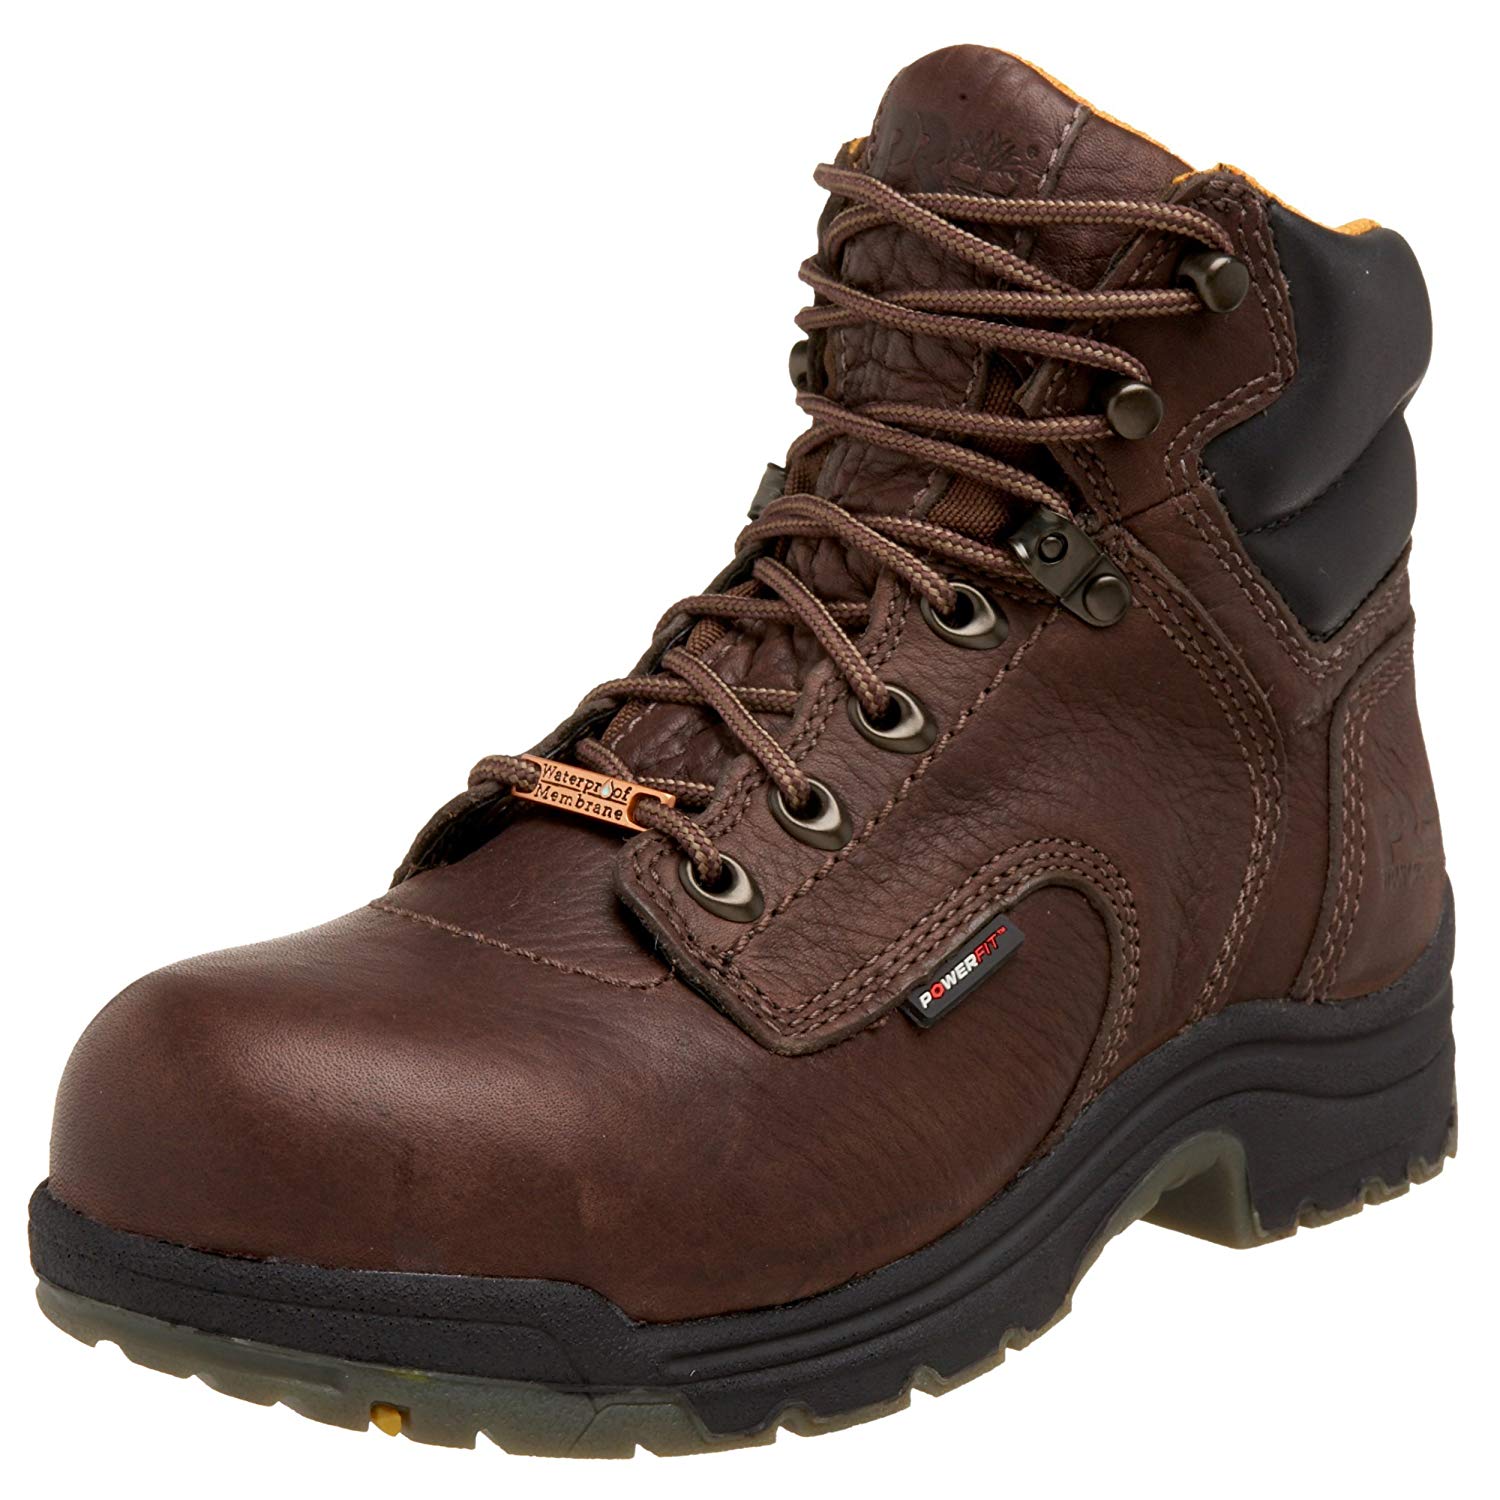 Timberland Womens Titan Closed Toe Ankle Combat Boots, Brown, Size 6.0 ...